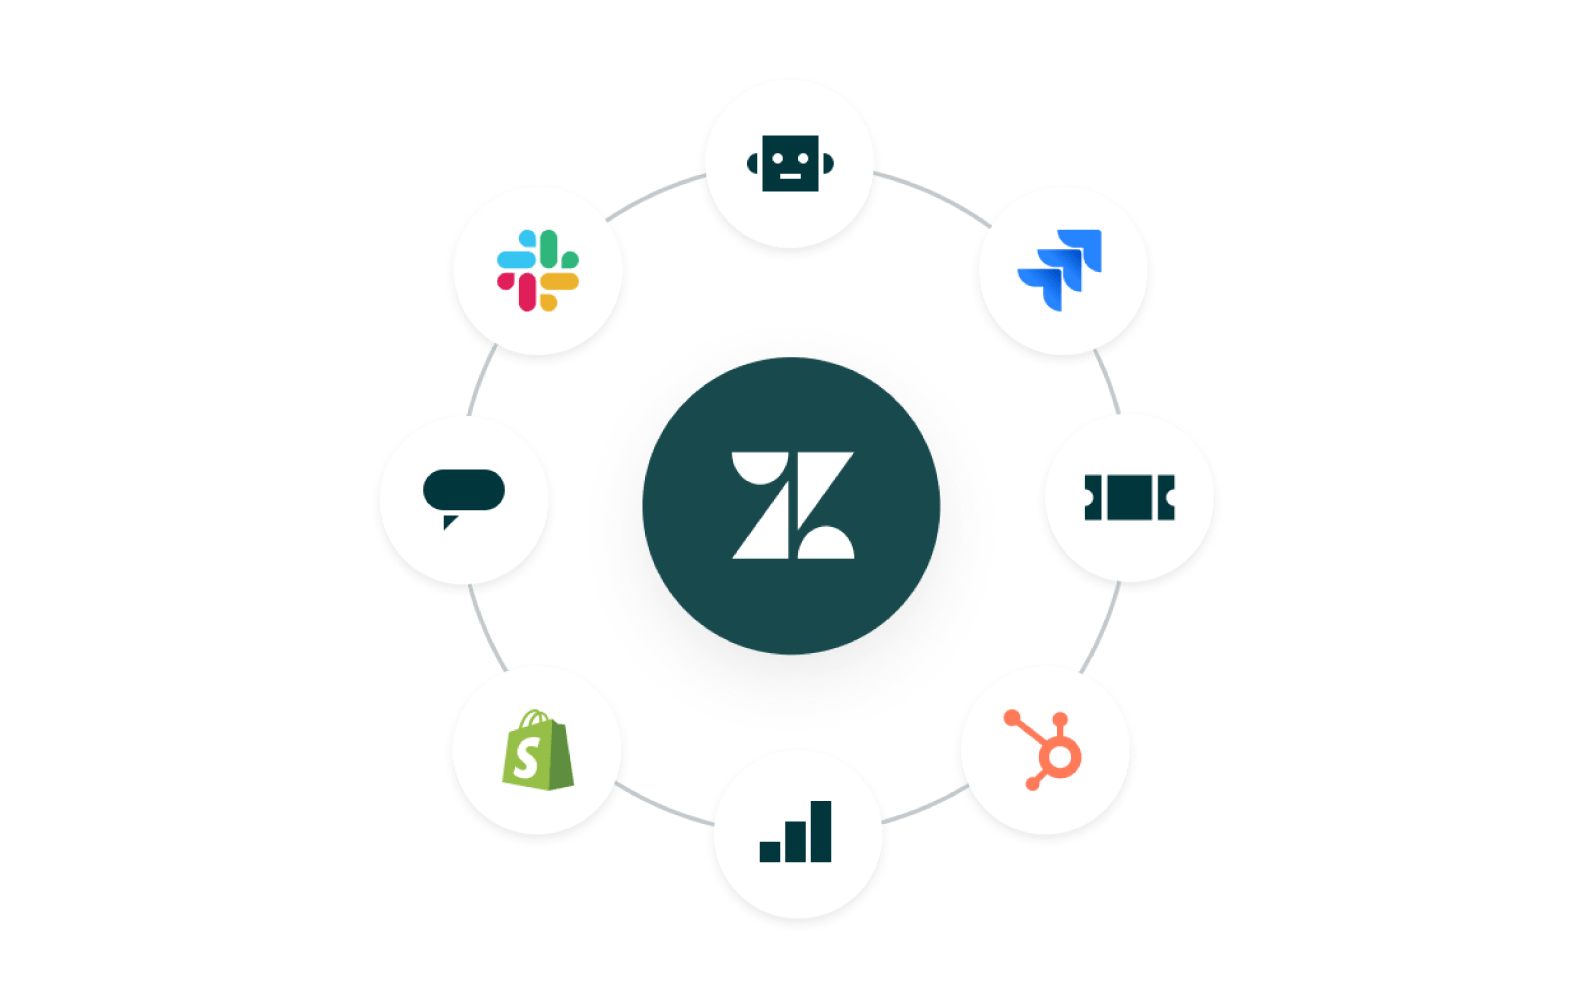 A screenshot depicts the Zendesk logo surrounded by the logos of popular apps available in the Zendesk Marketplace.